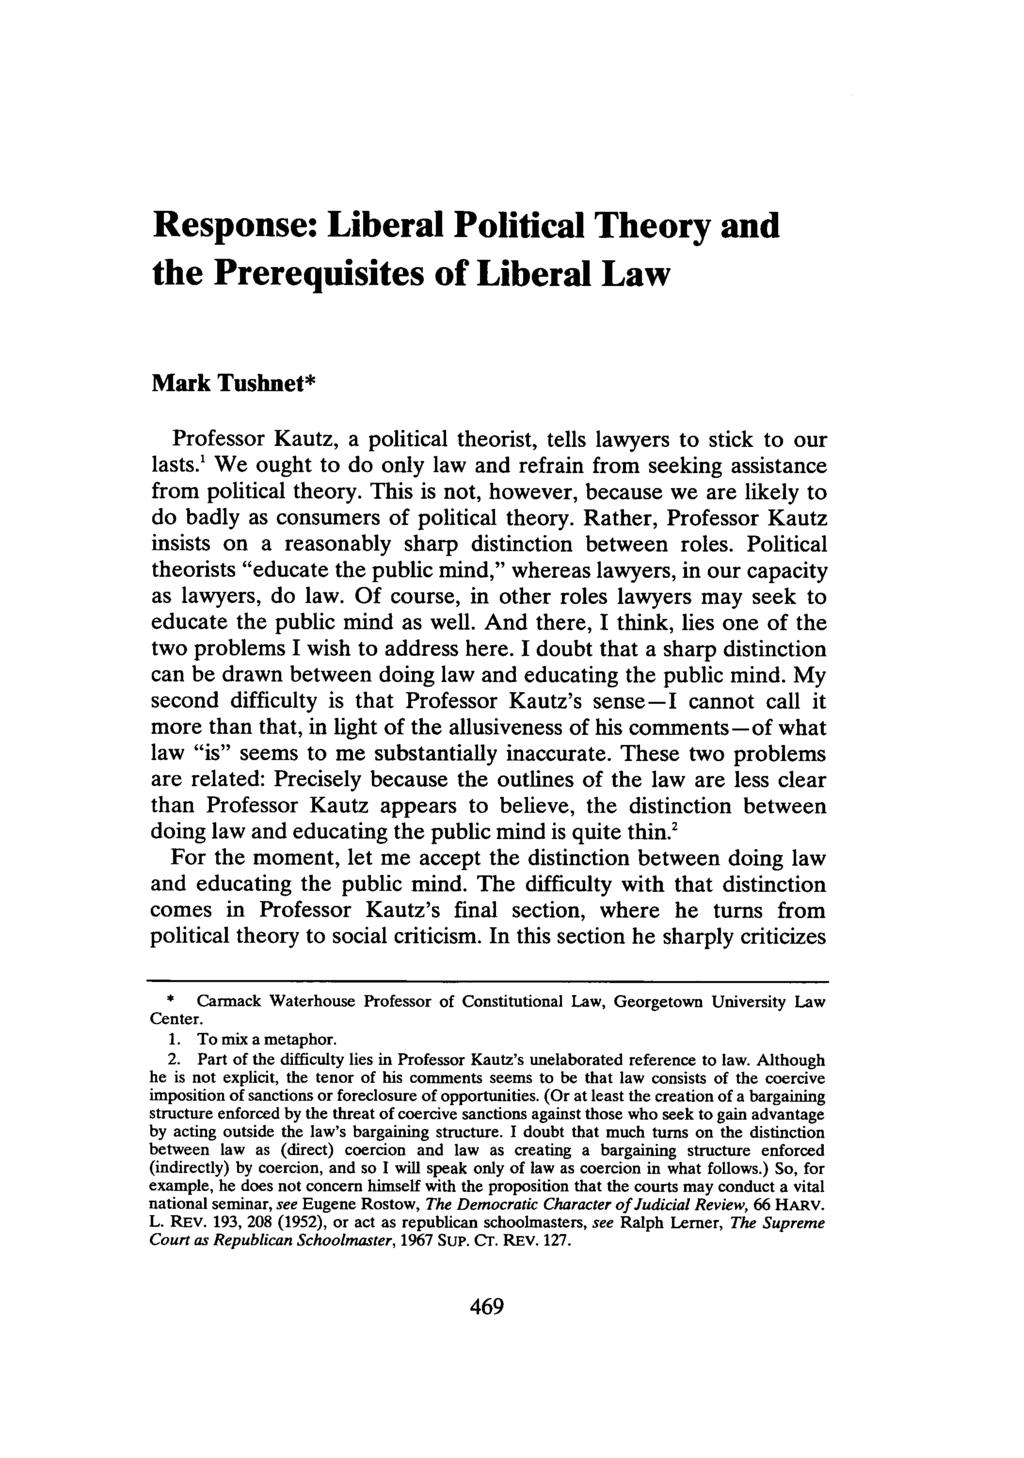 Tushnet: Response: Liberal Political Theory and the Prerequisites of Liberal Law Response: Liberal Political Theory and the Prerequisites of Liberal Law Mark Tushnet* Professor Kautz, a political